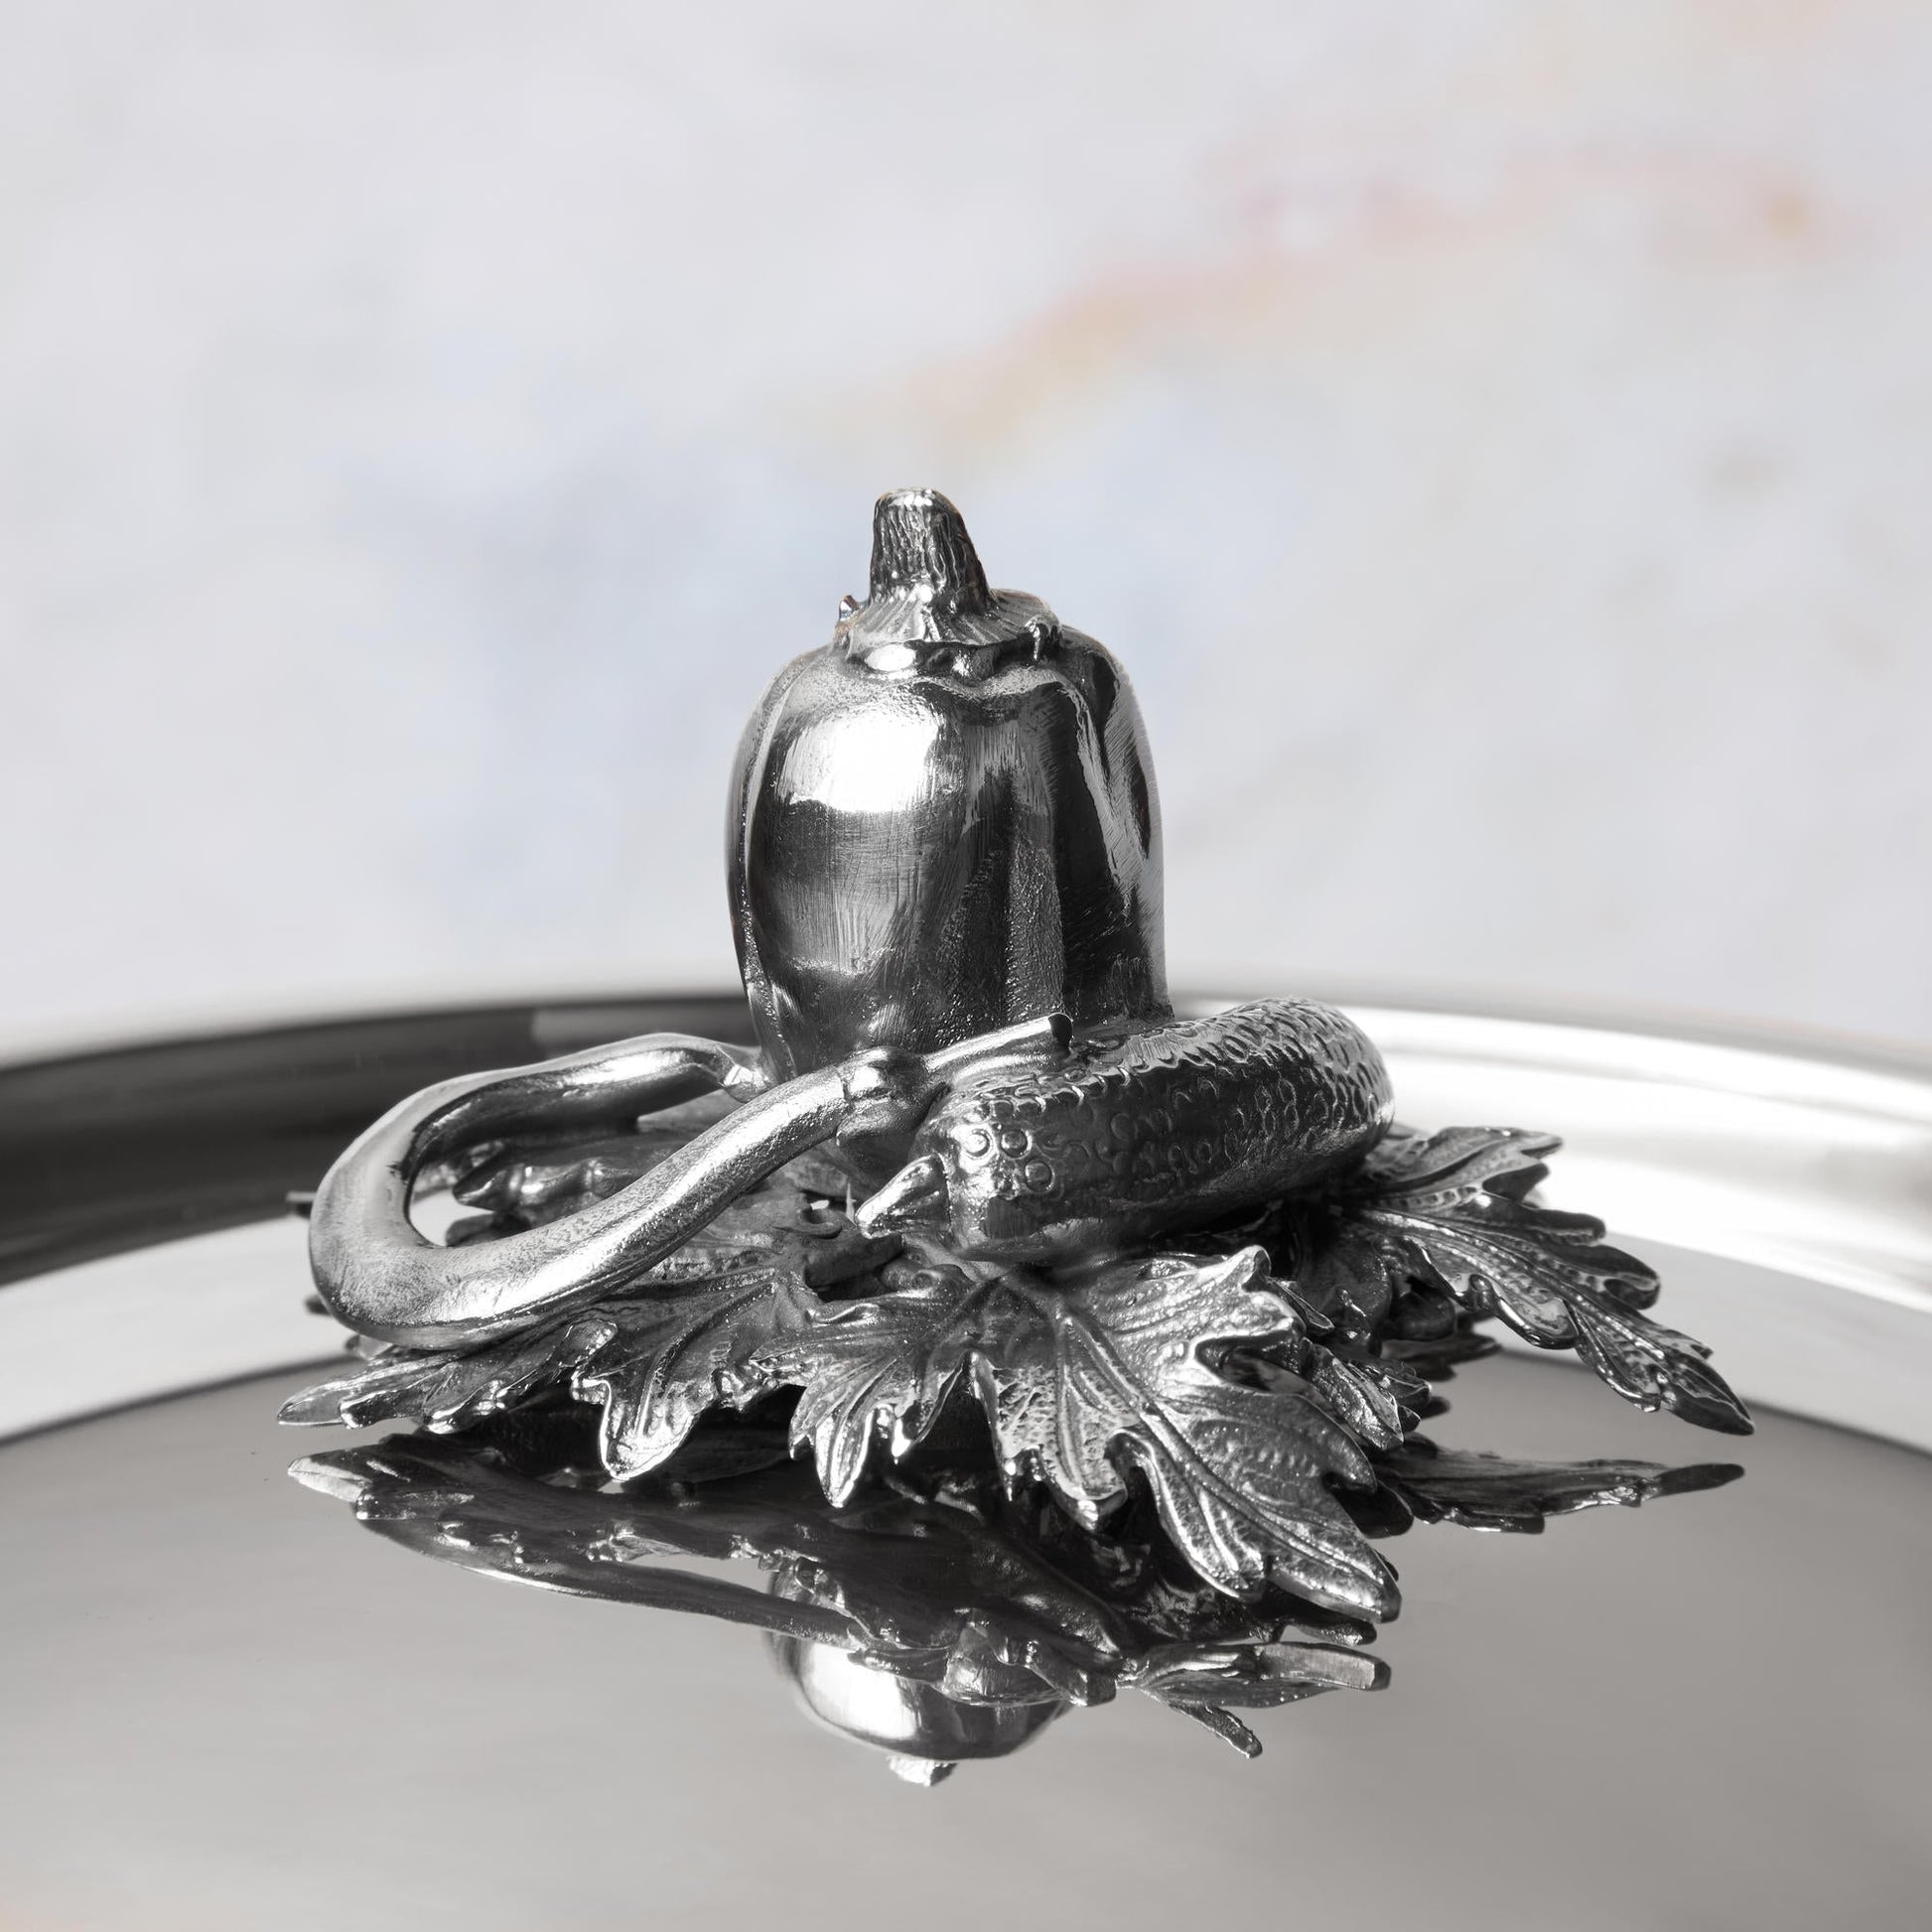 Decorated knob finial representing pepper, cucumber, string bean, cast in solid bronze and silver plated, on Opus Prima stainless steel lid by Ruffoni